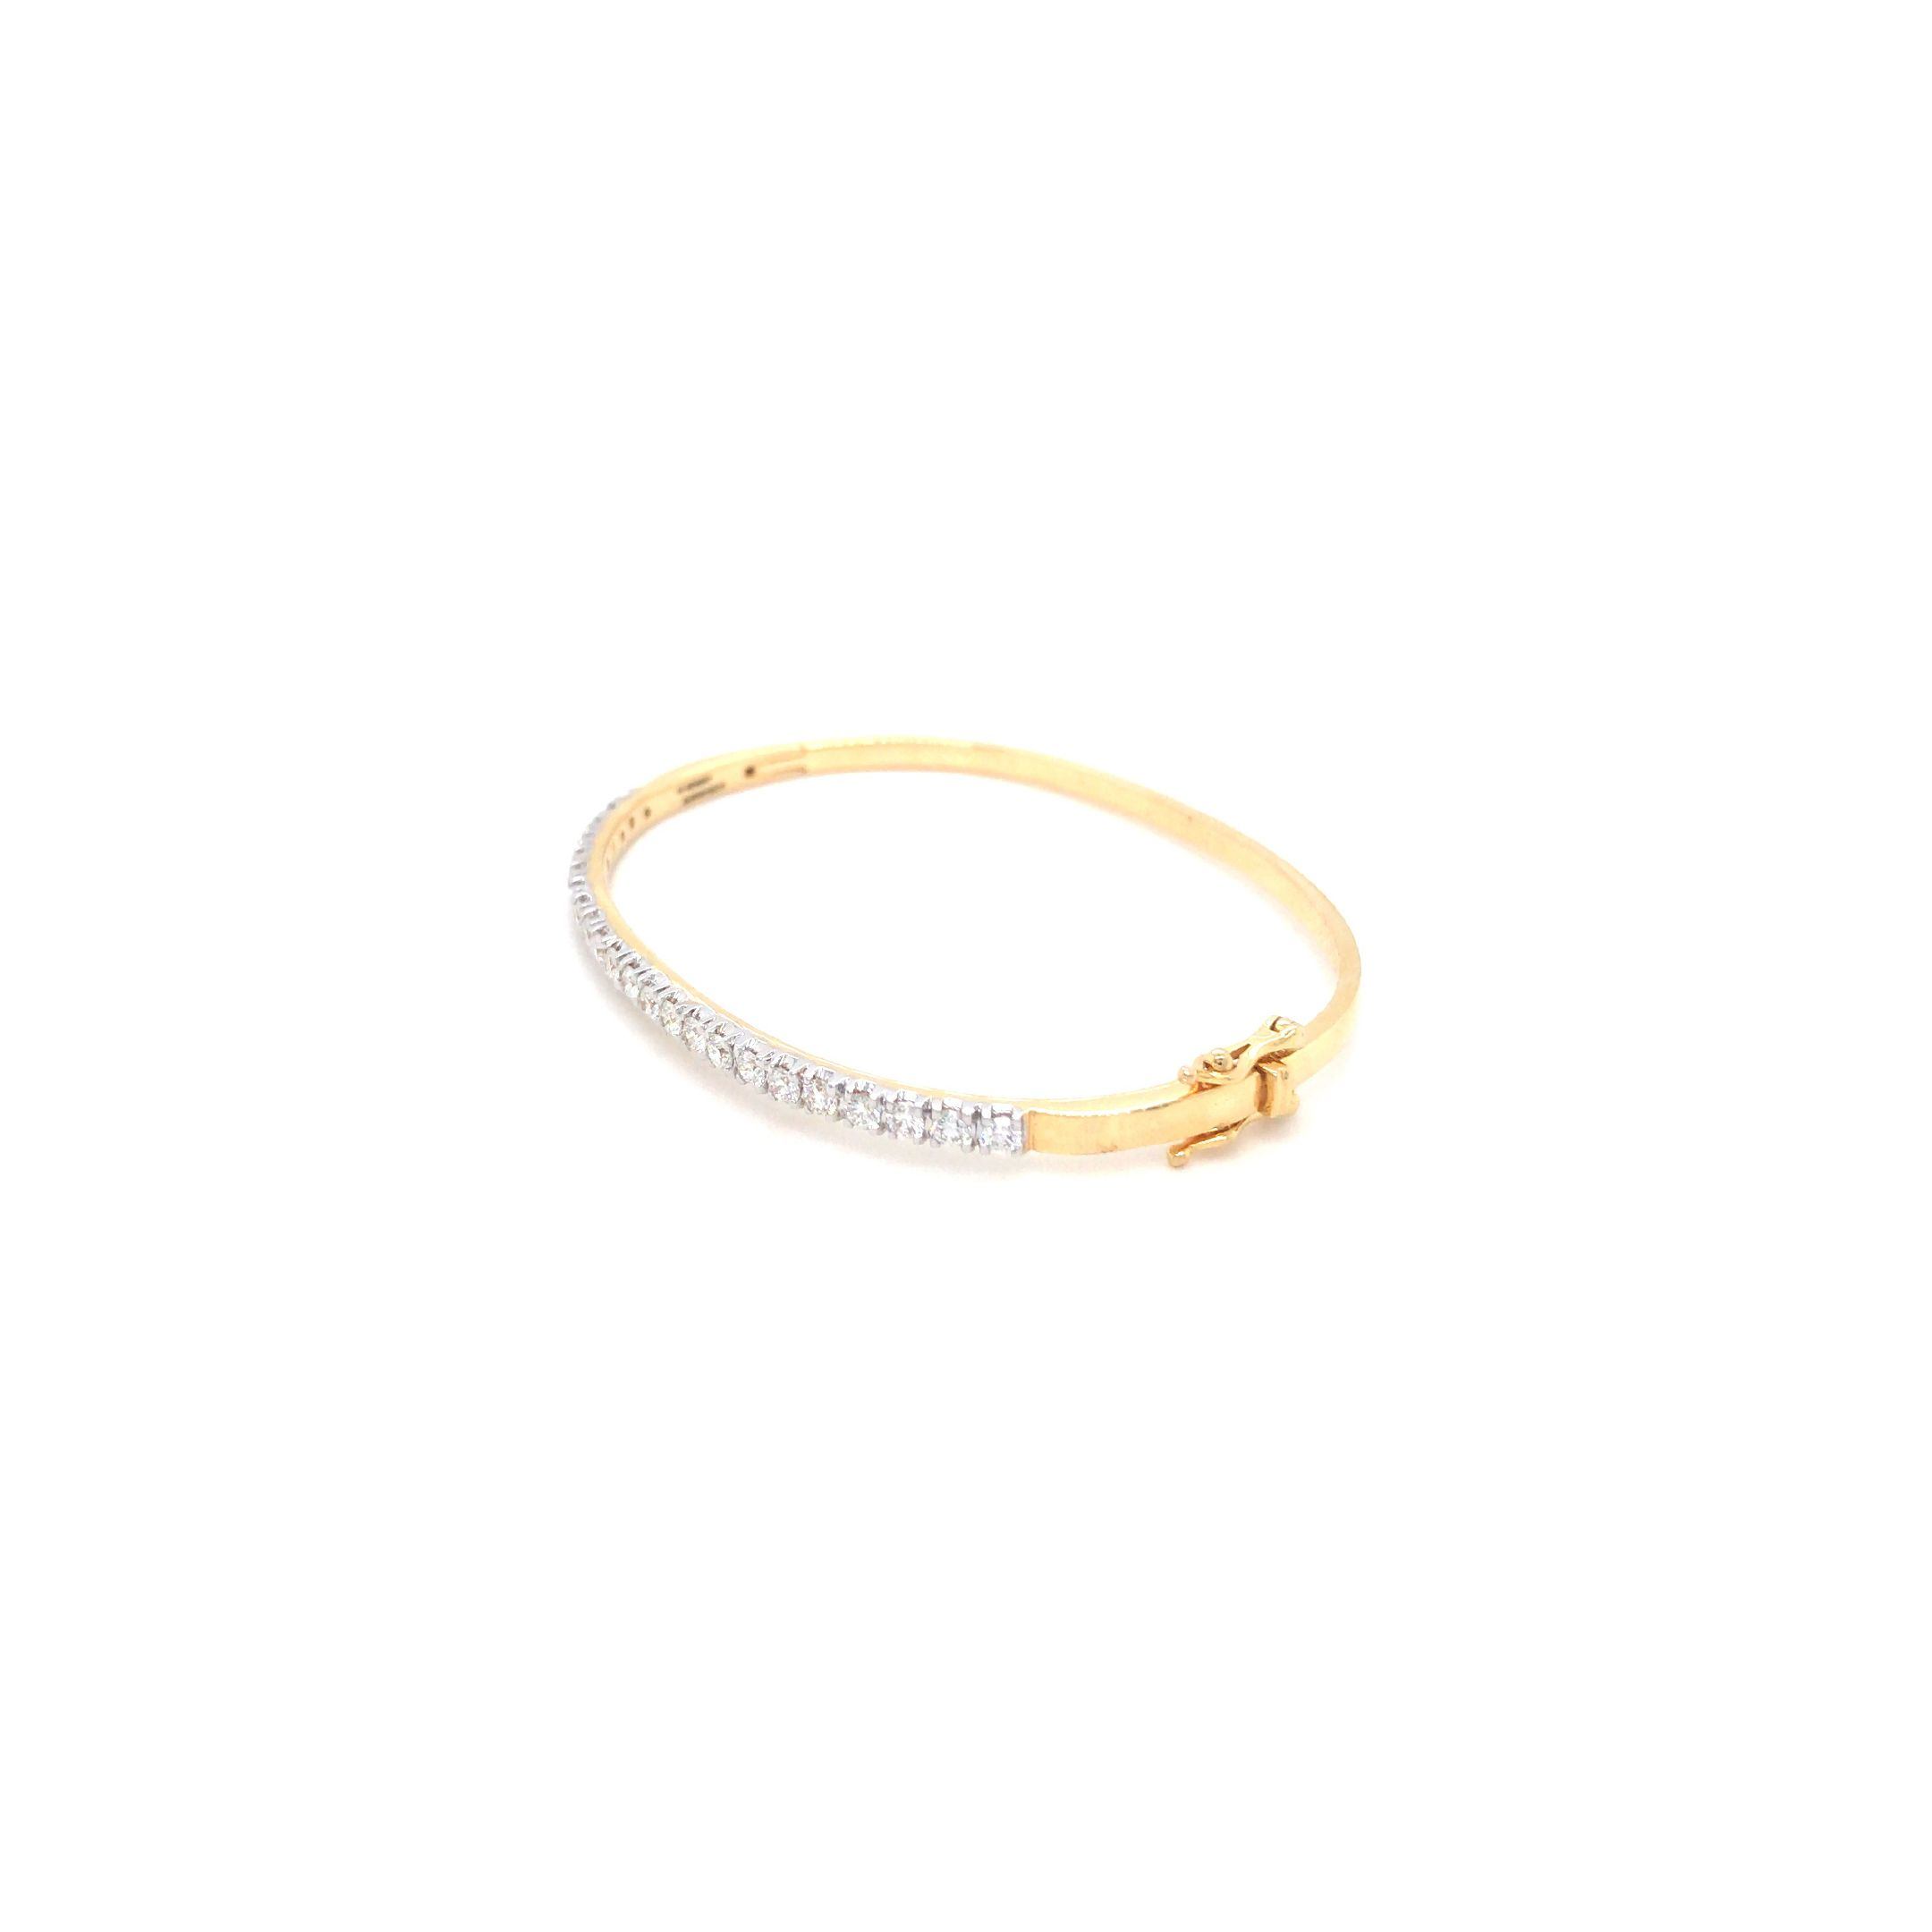 Buy quality Imported cartier style bracelet in Surat